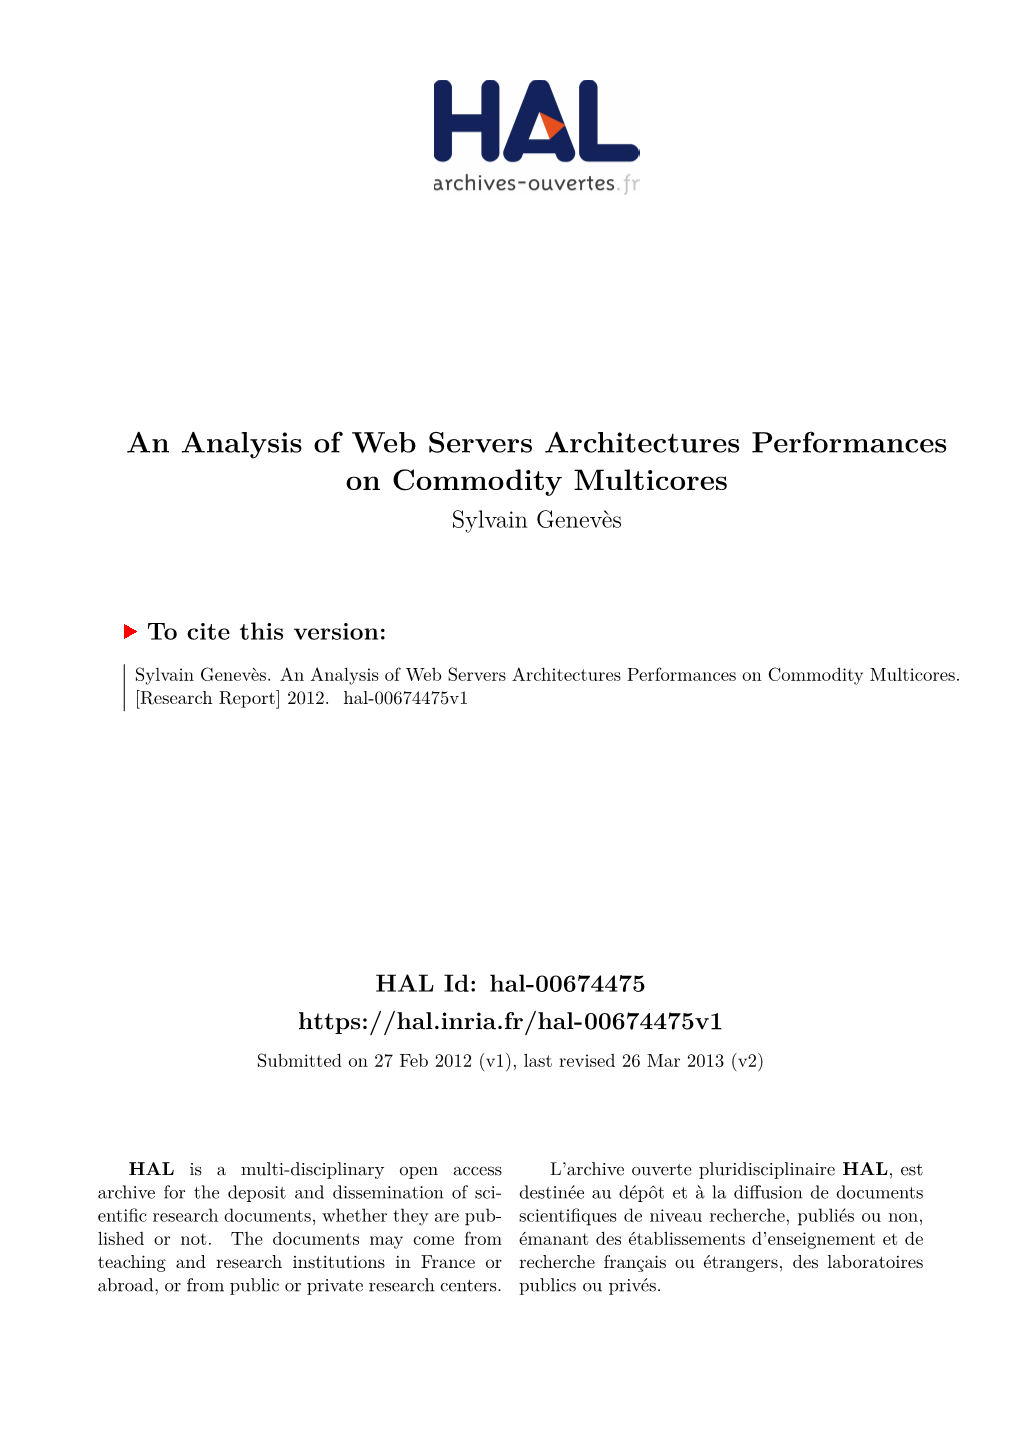 An Analysis of Web Servers Architectures Performances on Commodity Multicores Sylvain Genevès